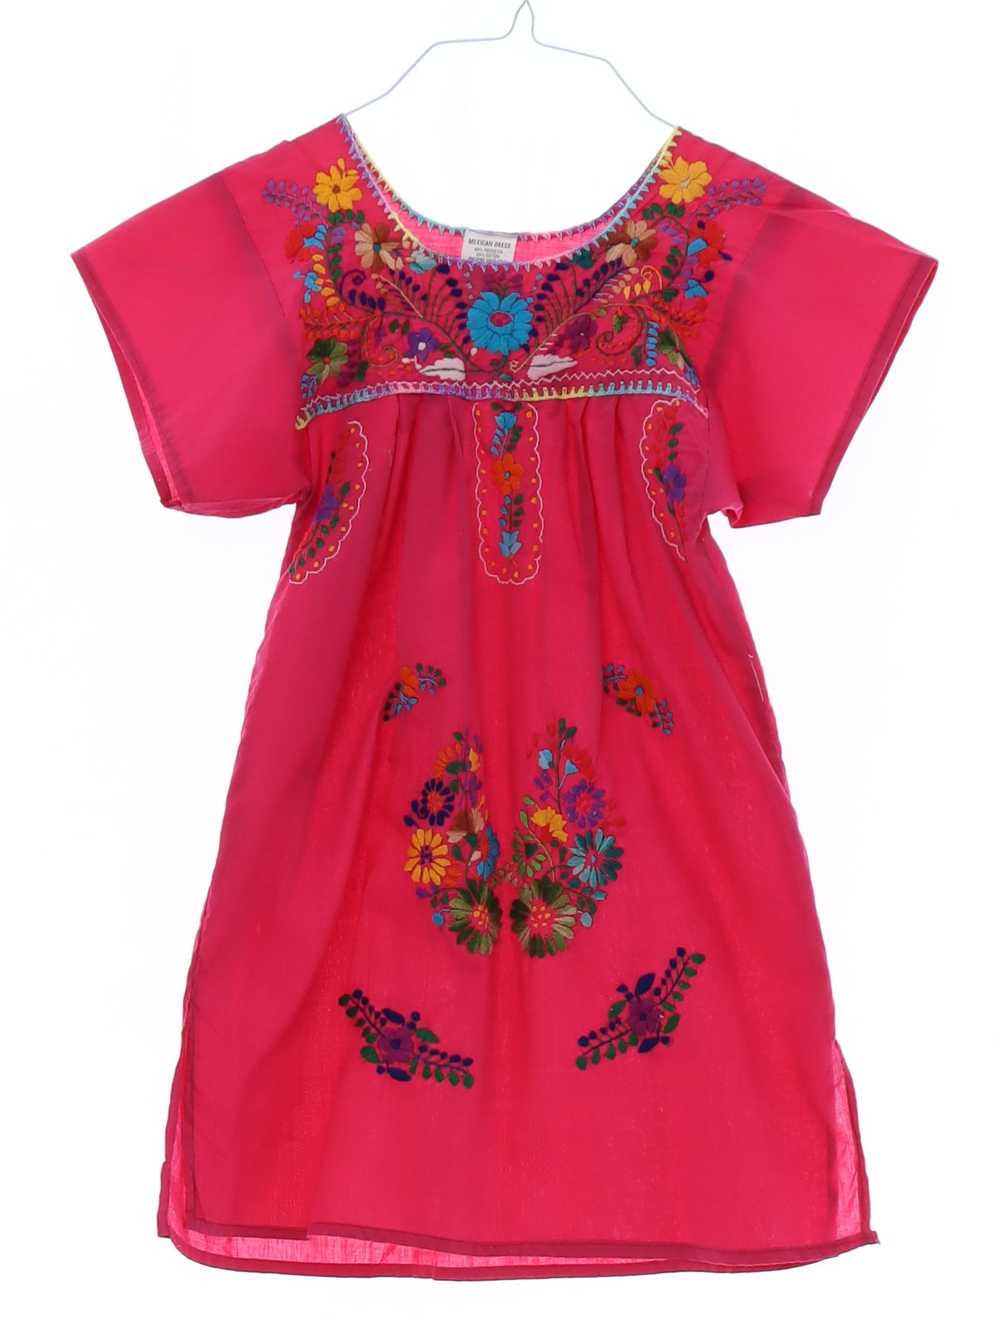 1990's Womens/Childs Huipil Style Dress - image 1